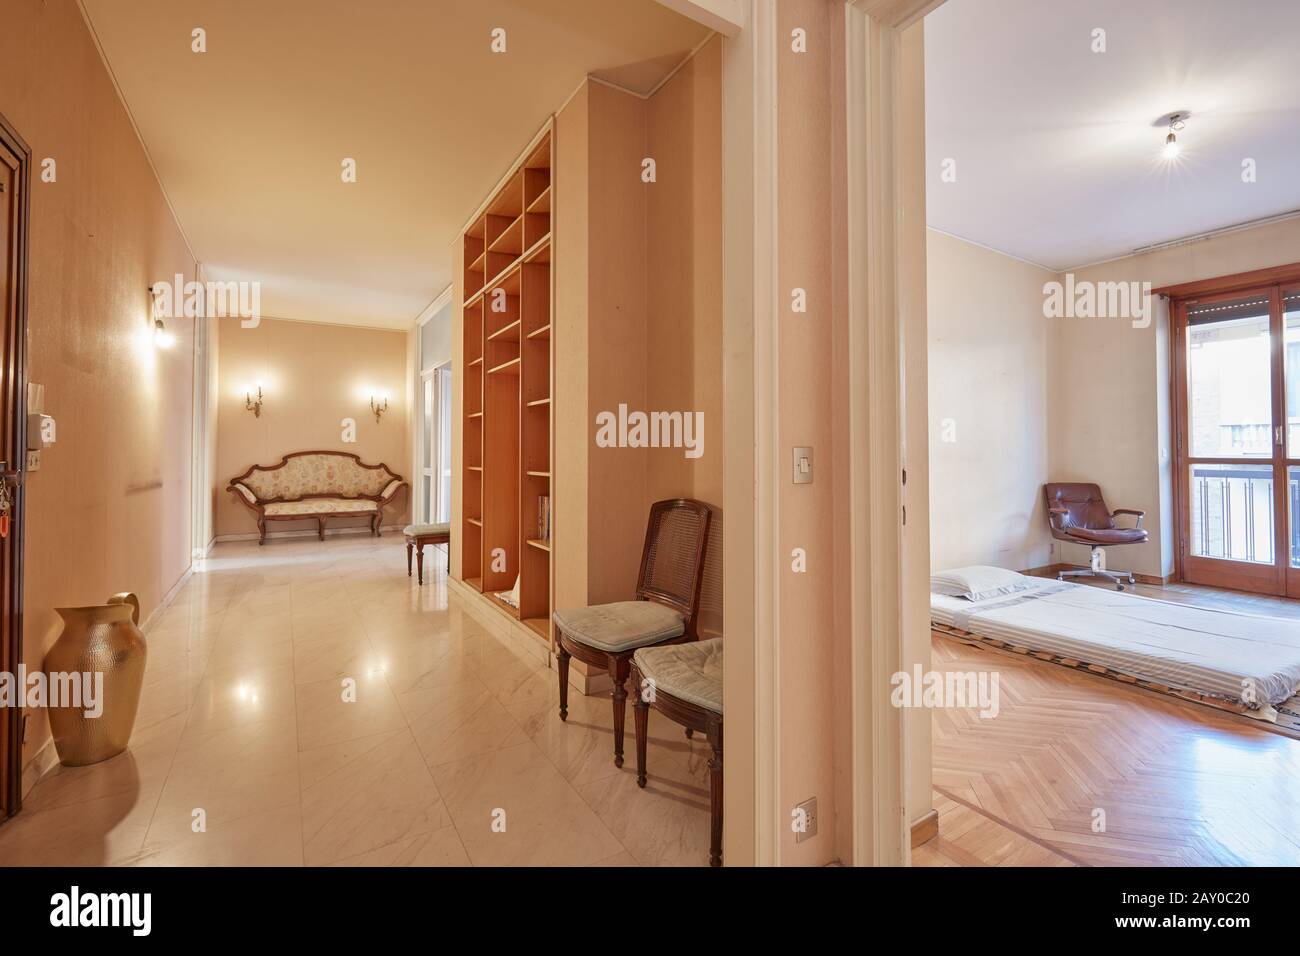 Corridor and bedroom view in apartment interior Stock Photo